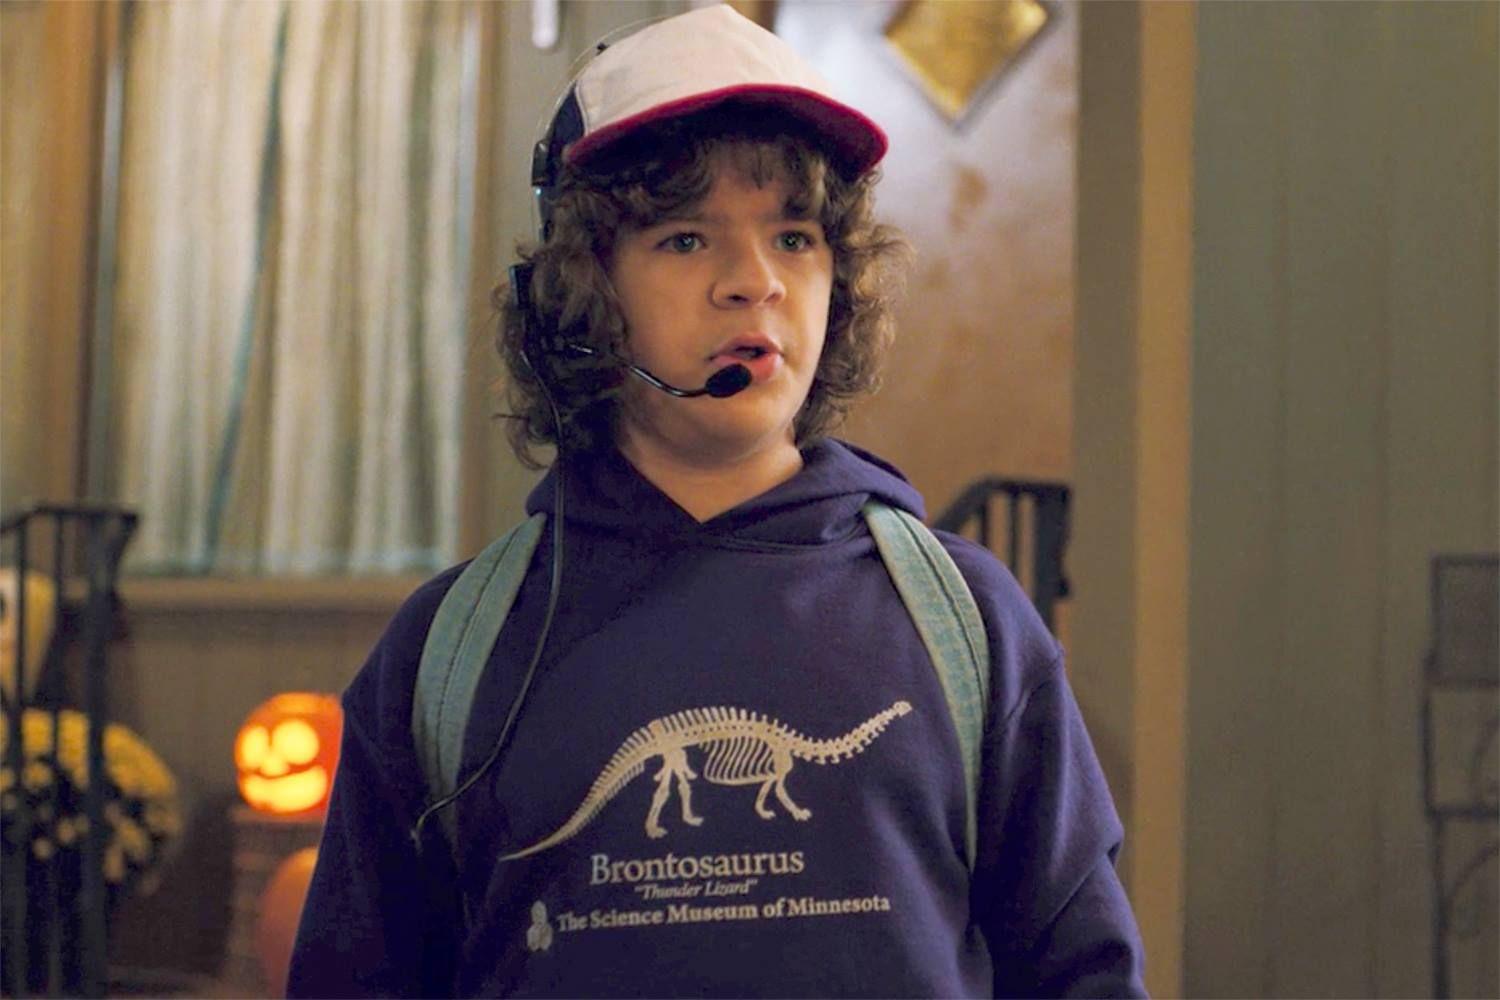 Stranger Things' Fans Crash Science Museum's Website Trying to Score